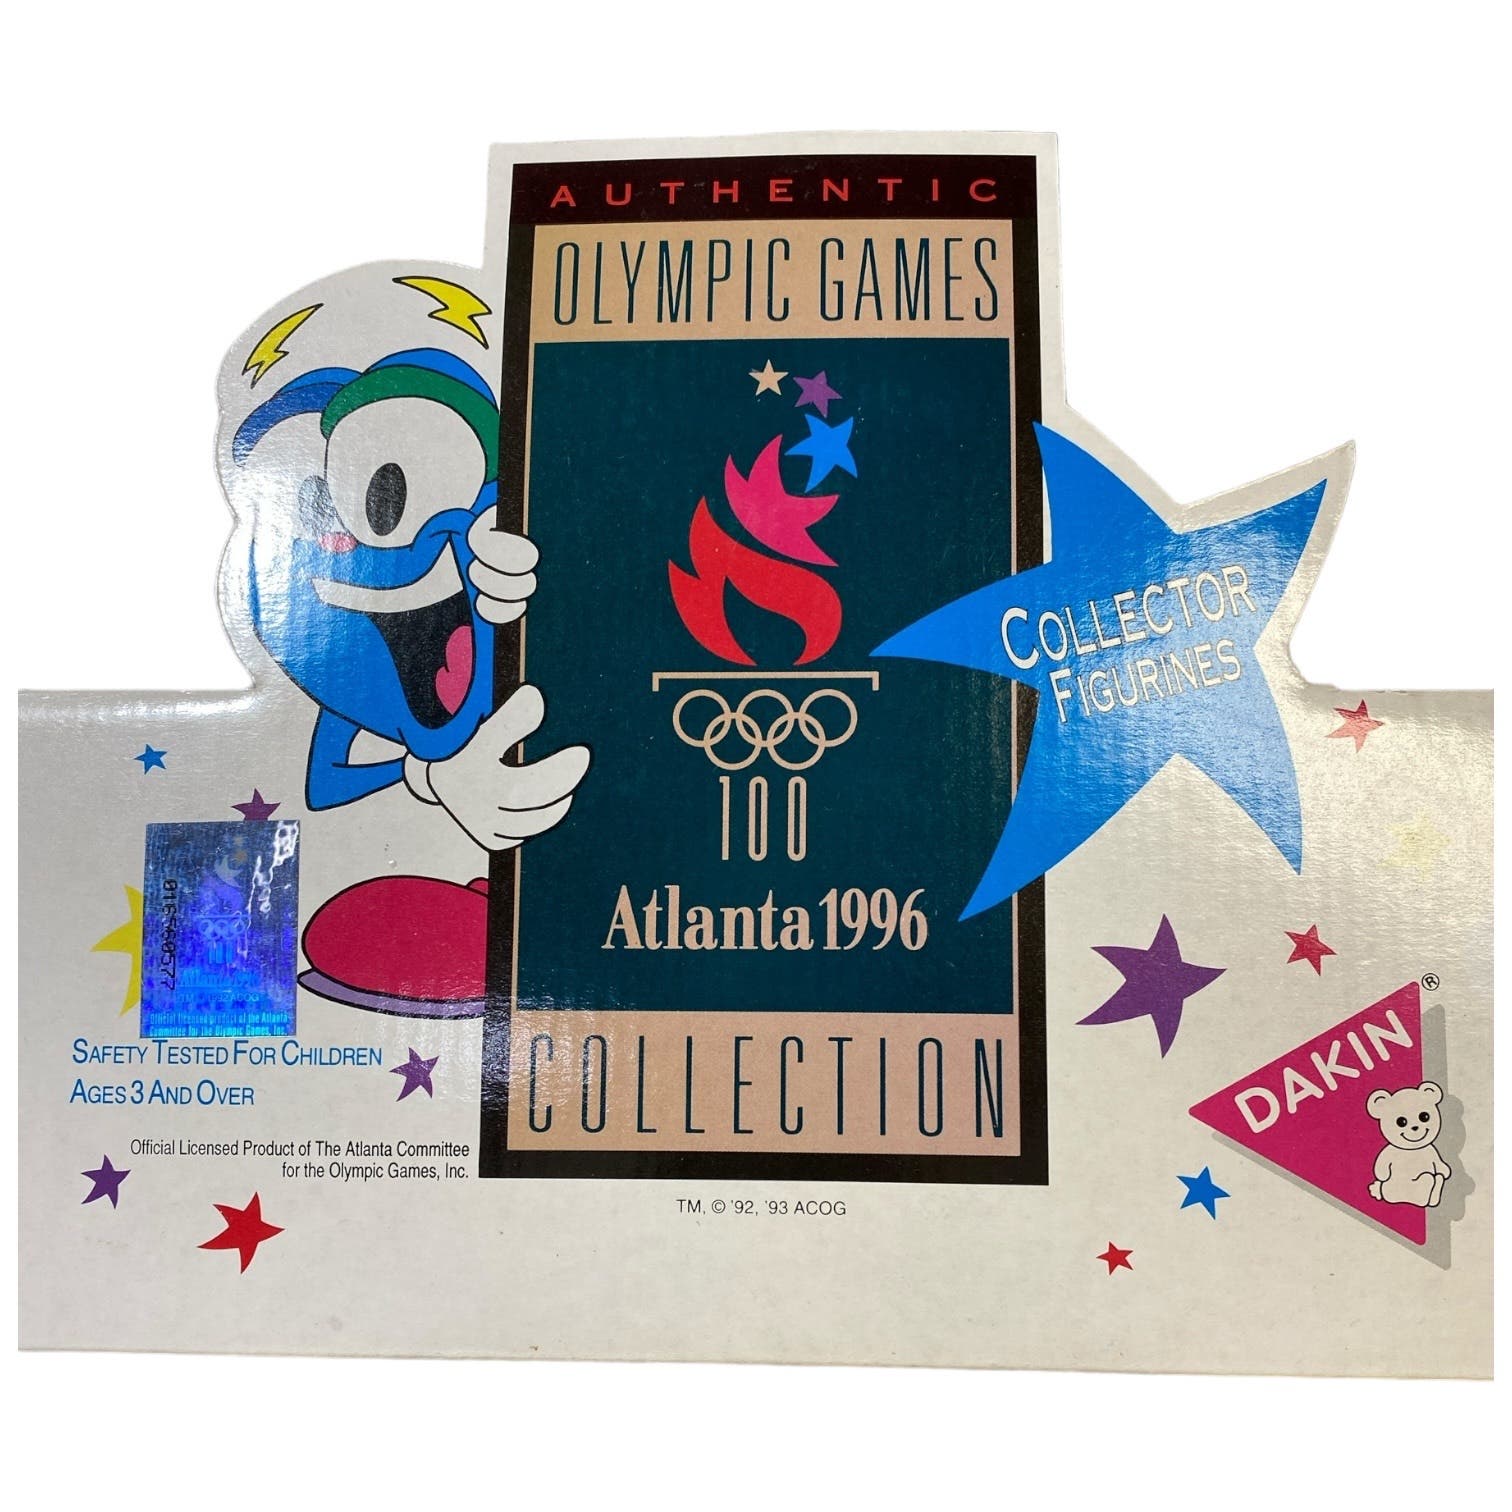 VTG 1996 Atlanta Olympic Games PVC Izzy 32 Figures by Dakin with Store Display